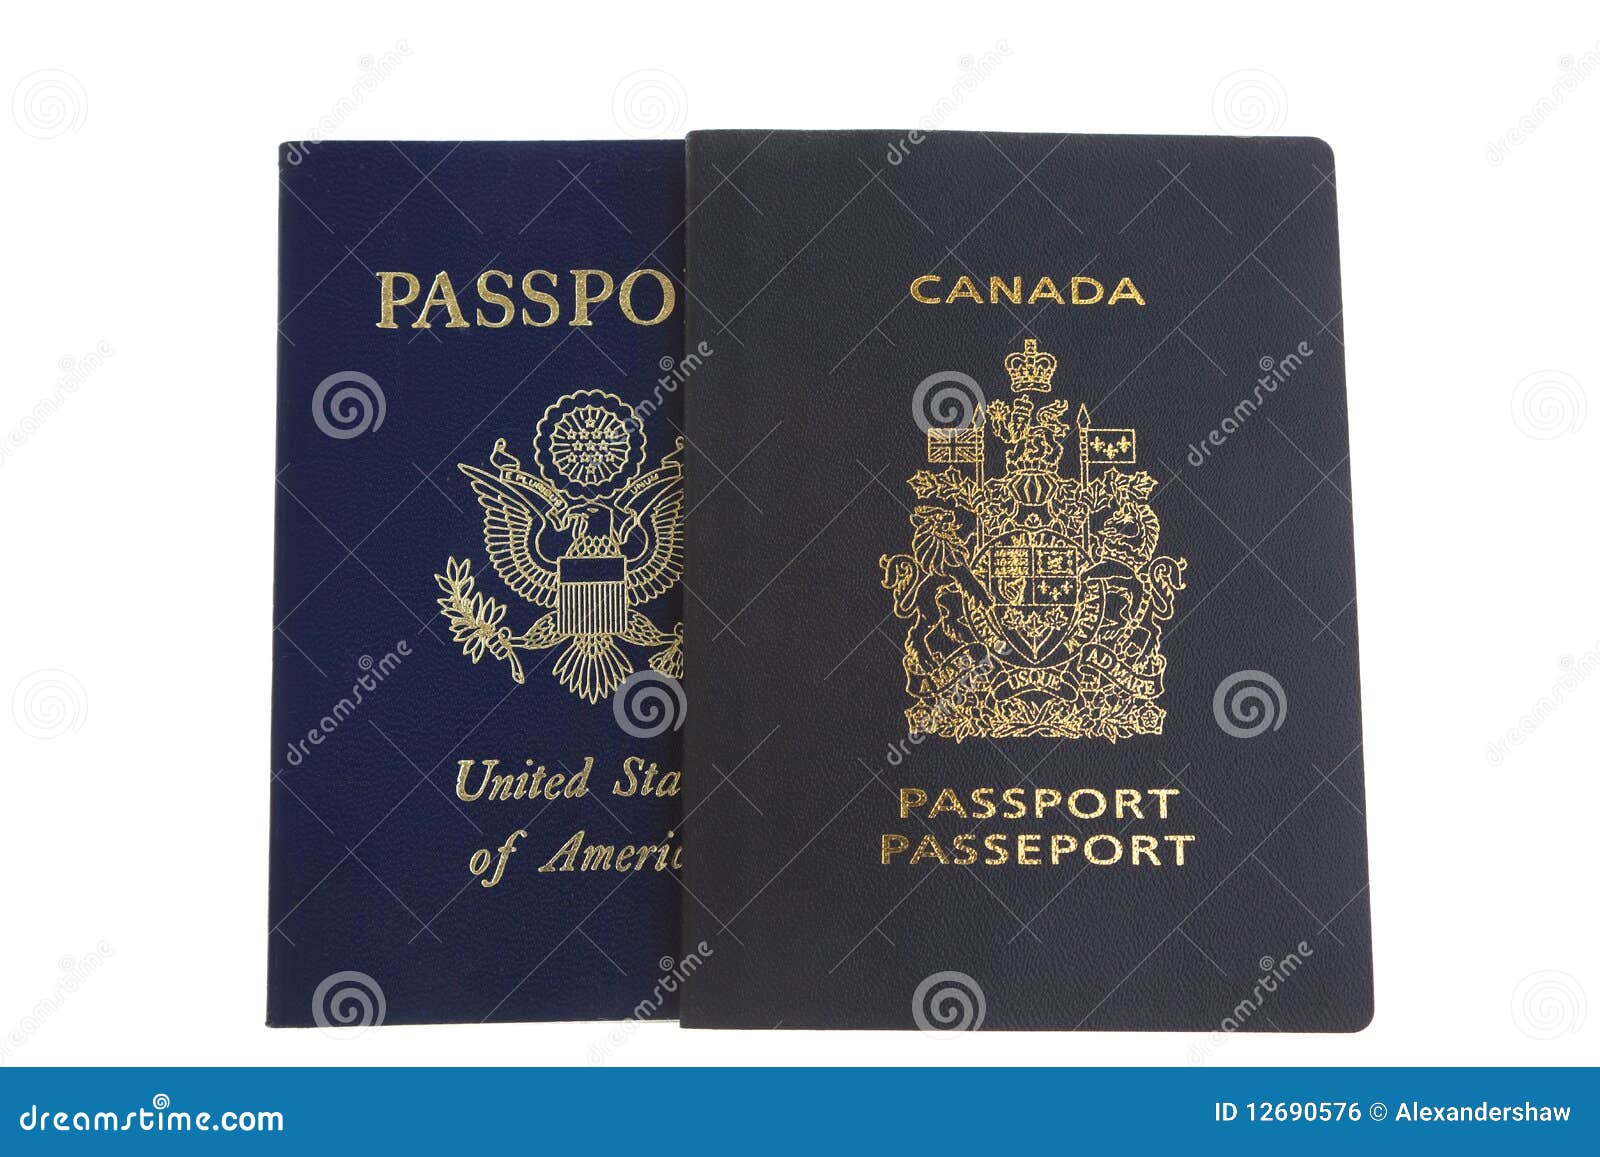 does a u.s. citizen need a passport for canada